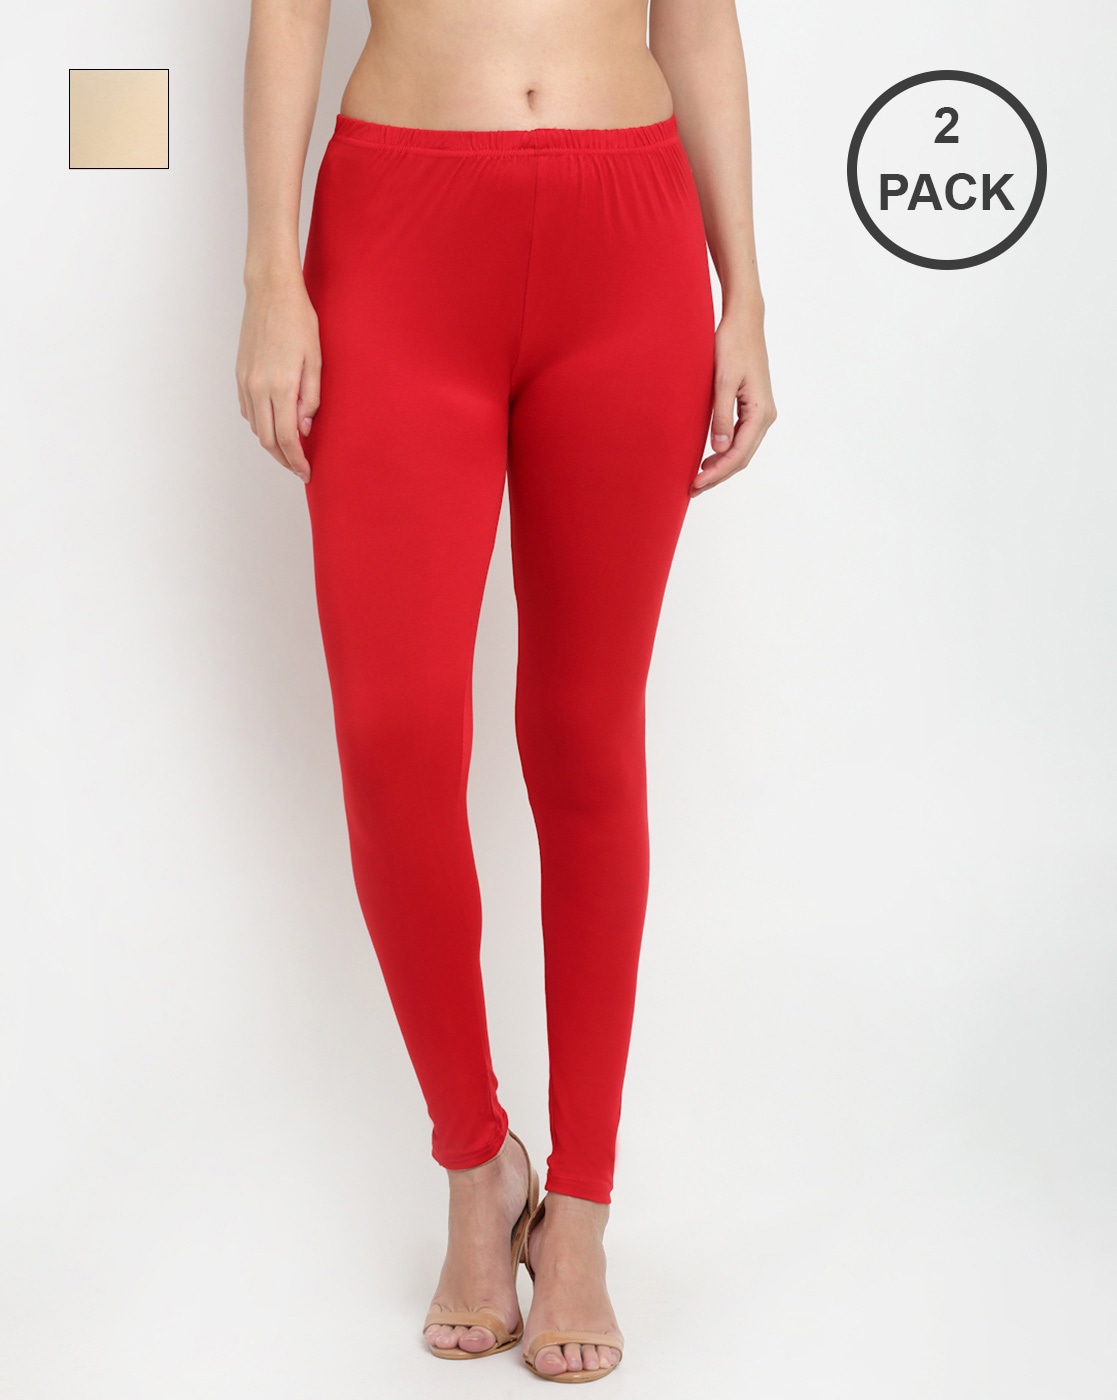 Reliance Trends ' Fusion' Red Women Fleece Leggings at Rs 265 in